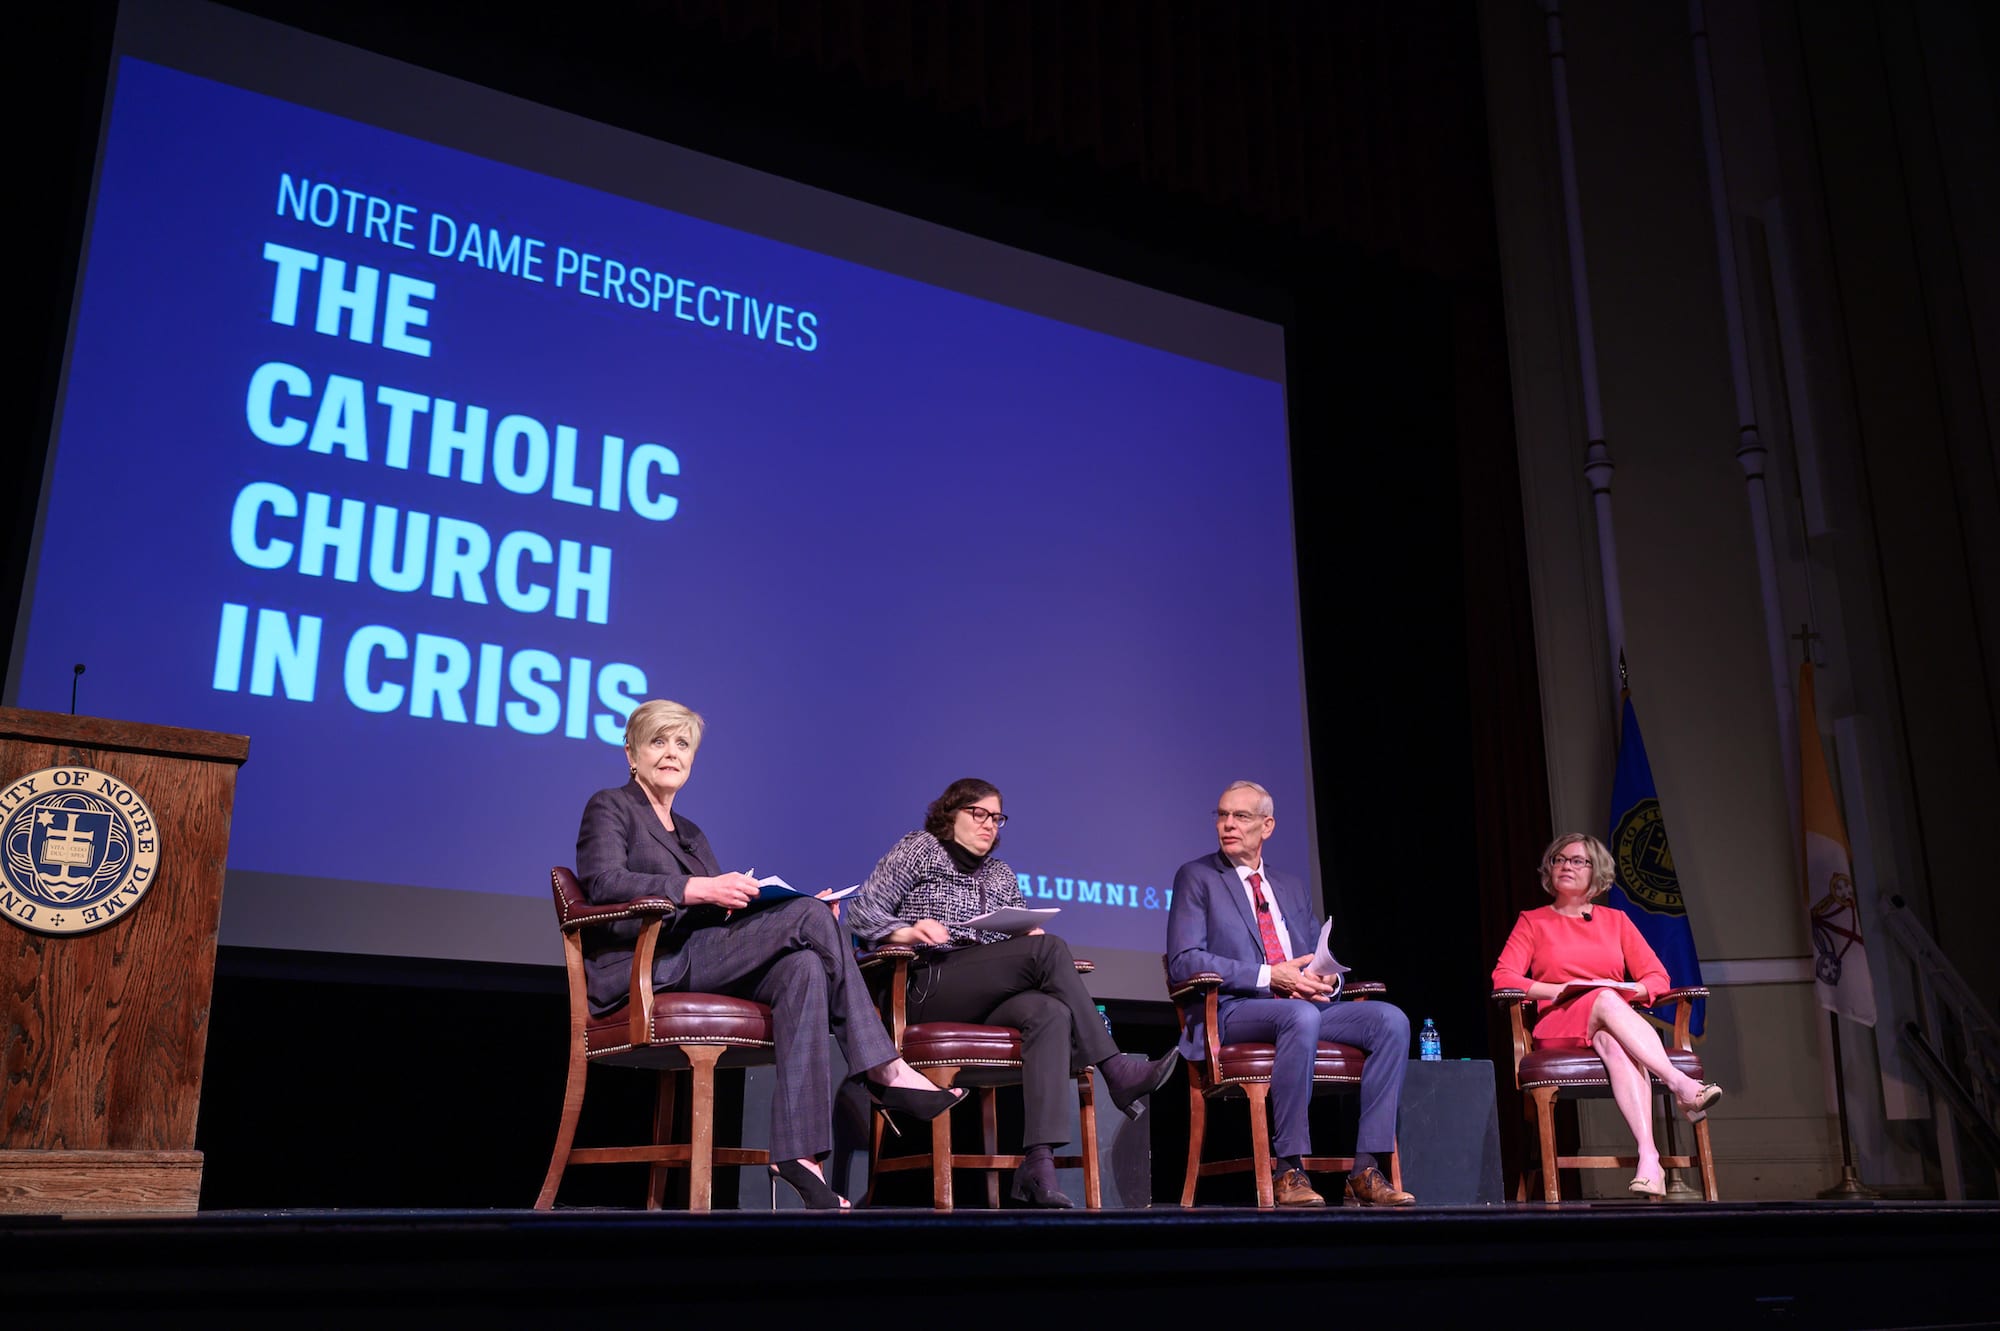 ND Perspectives: The Catholic Church in Crisis